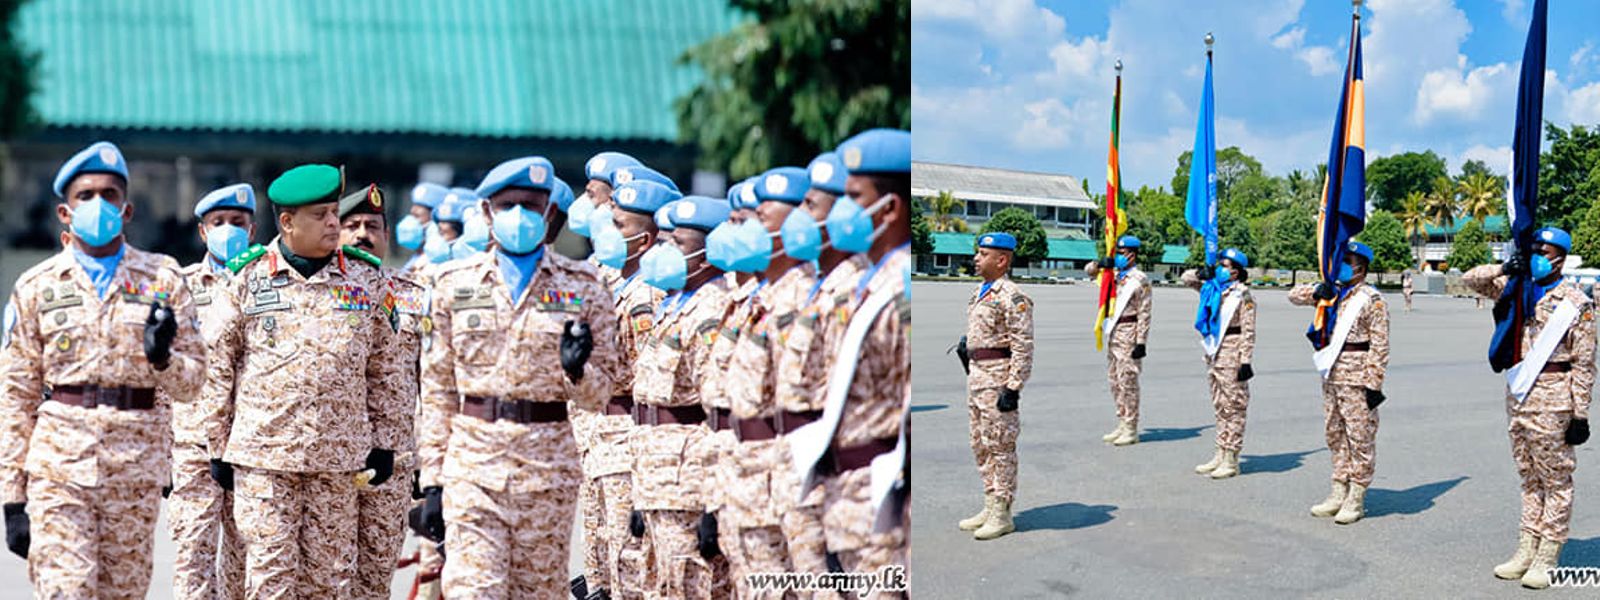 UNIFIL-bound military contingent includes first group of women soldiers